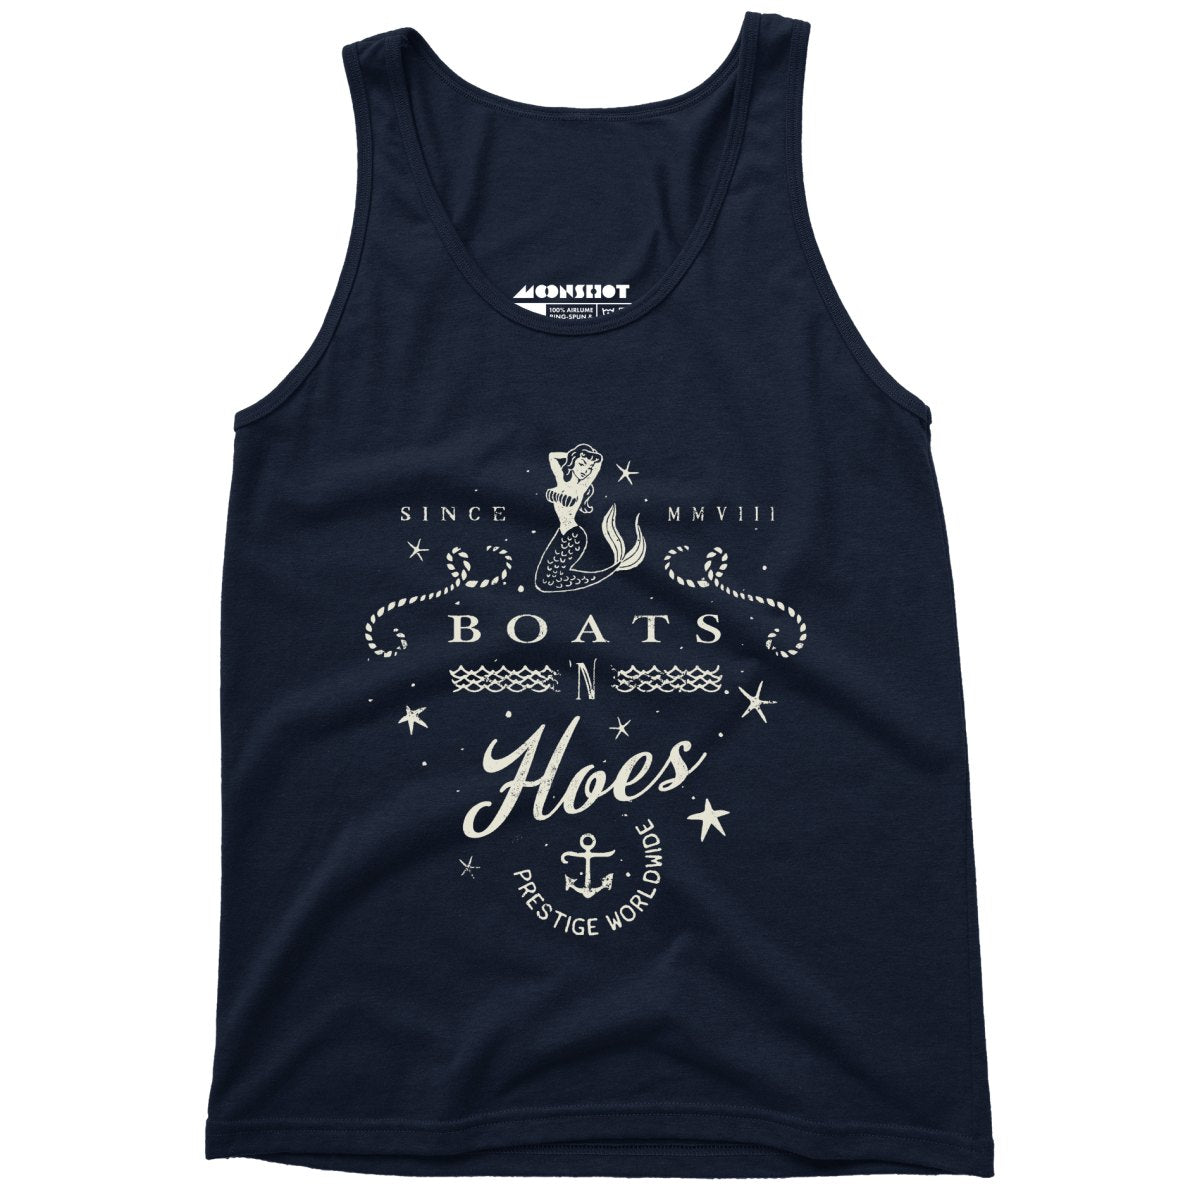 Boats n Hoes - Unisex Tank Top